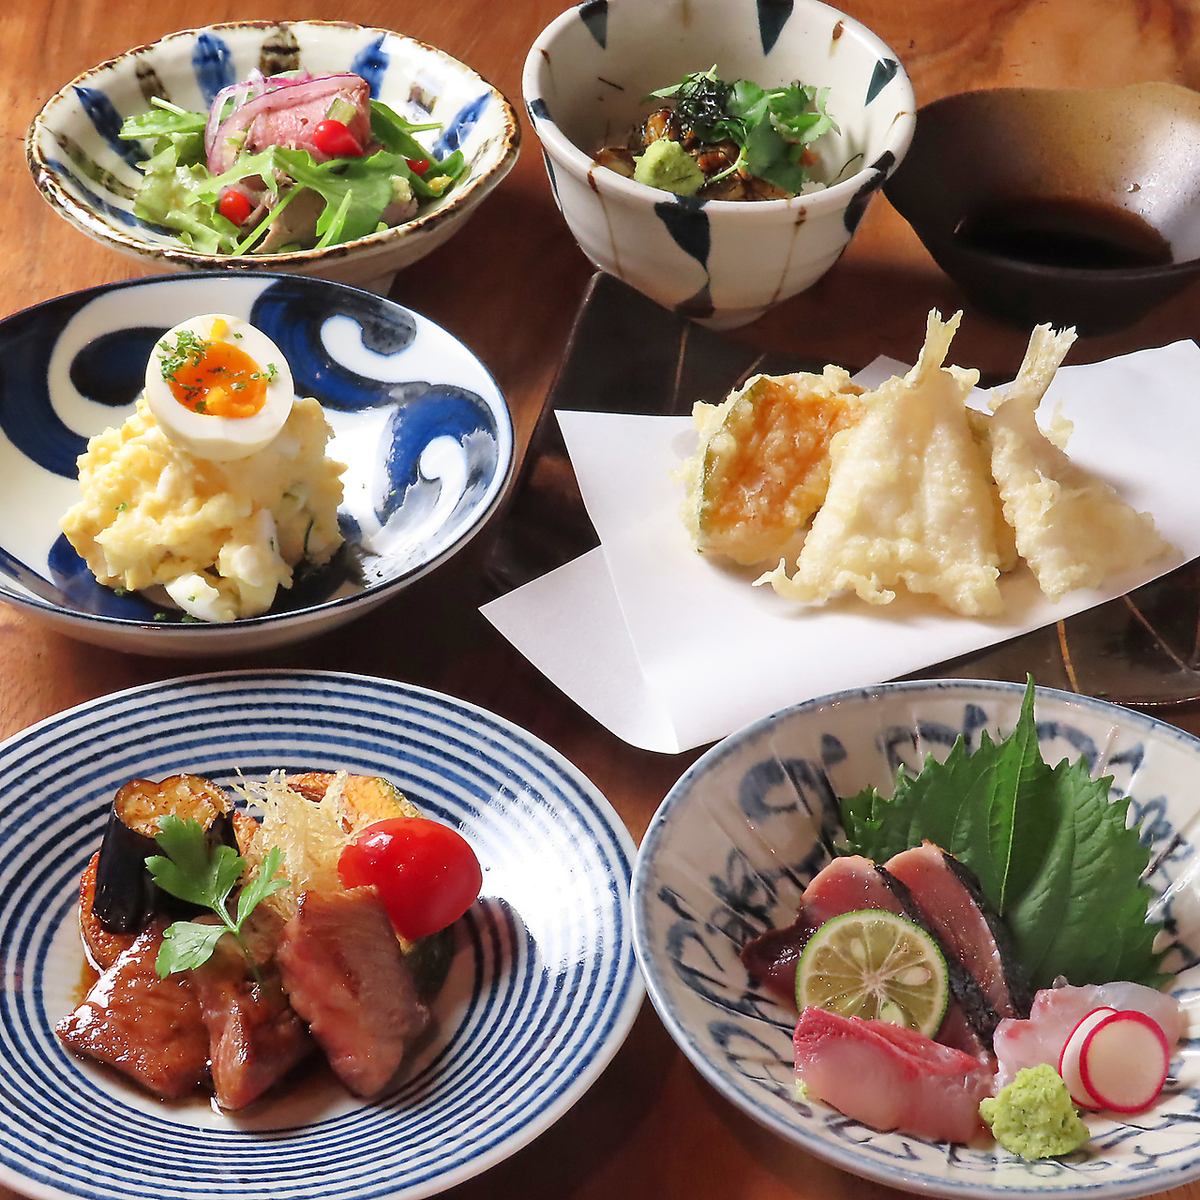 Each person will be treated to a heartwarming course with one dish at a time ◎ Enjoy the daily menu that focuses on fresh fish and seasonal vegetables ♪